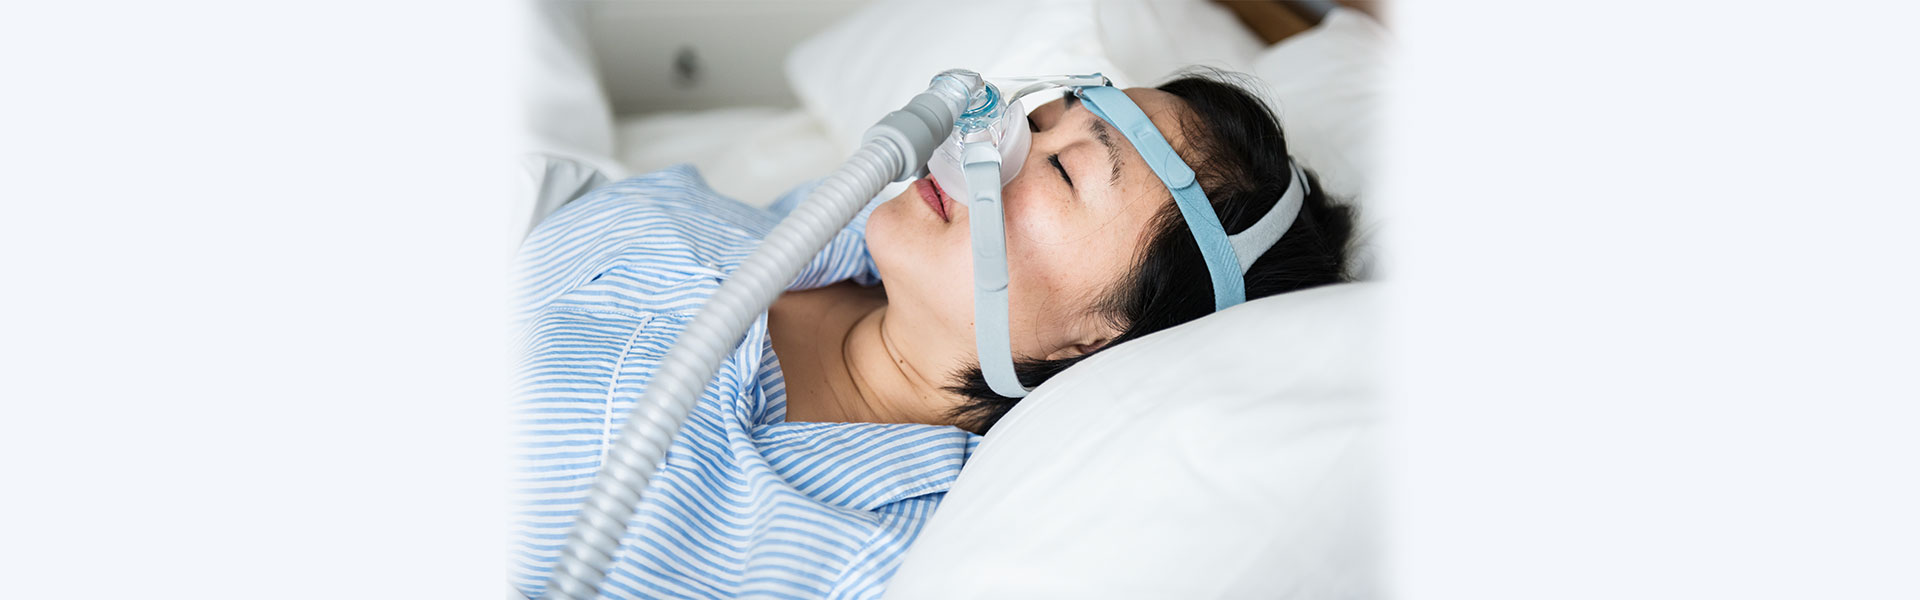 Comparing Sleep Apnea Treatments: Which Is the Most Effective?